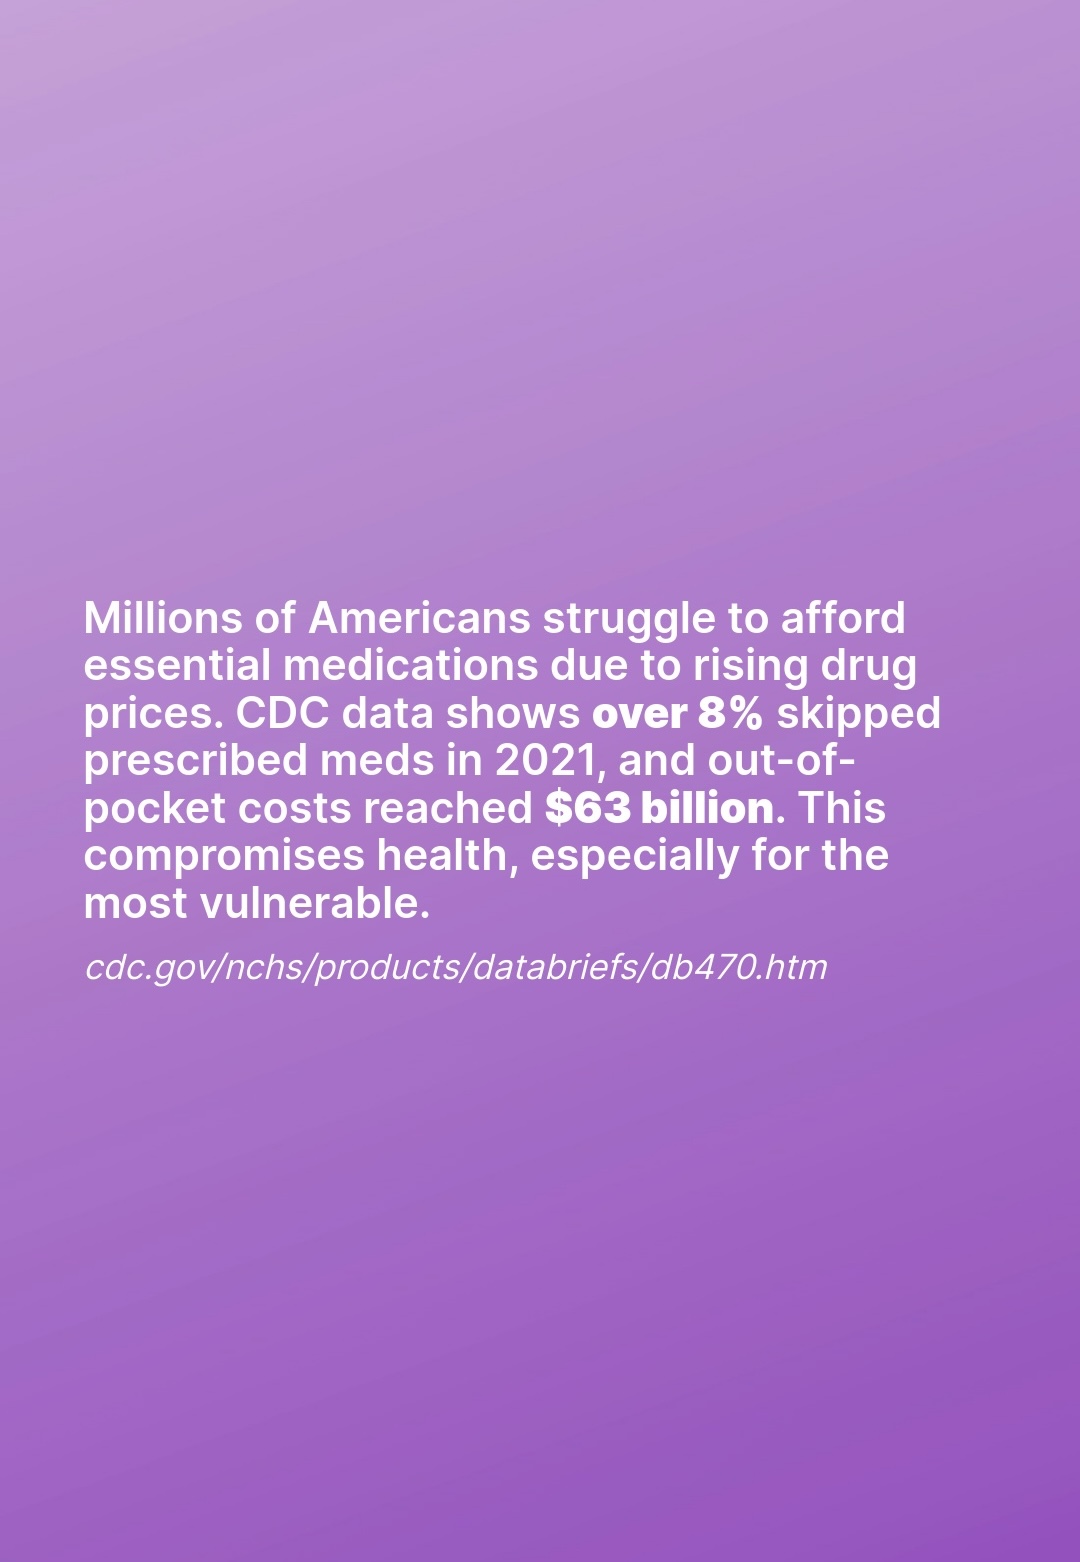 Millions of Americans struggle to afford essential medications due to rising drug prices. CDC data shows over 8% skipped prescribed meds in 2021, and out-of-pocket costs reached $63 billion. This compromises health, especially for the most vulnerable.